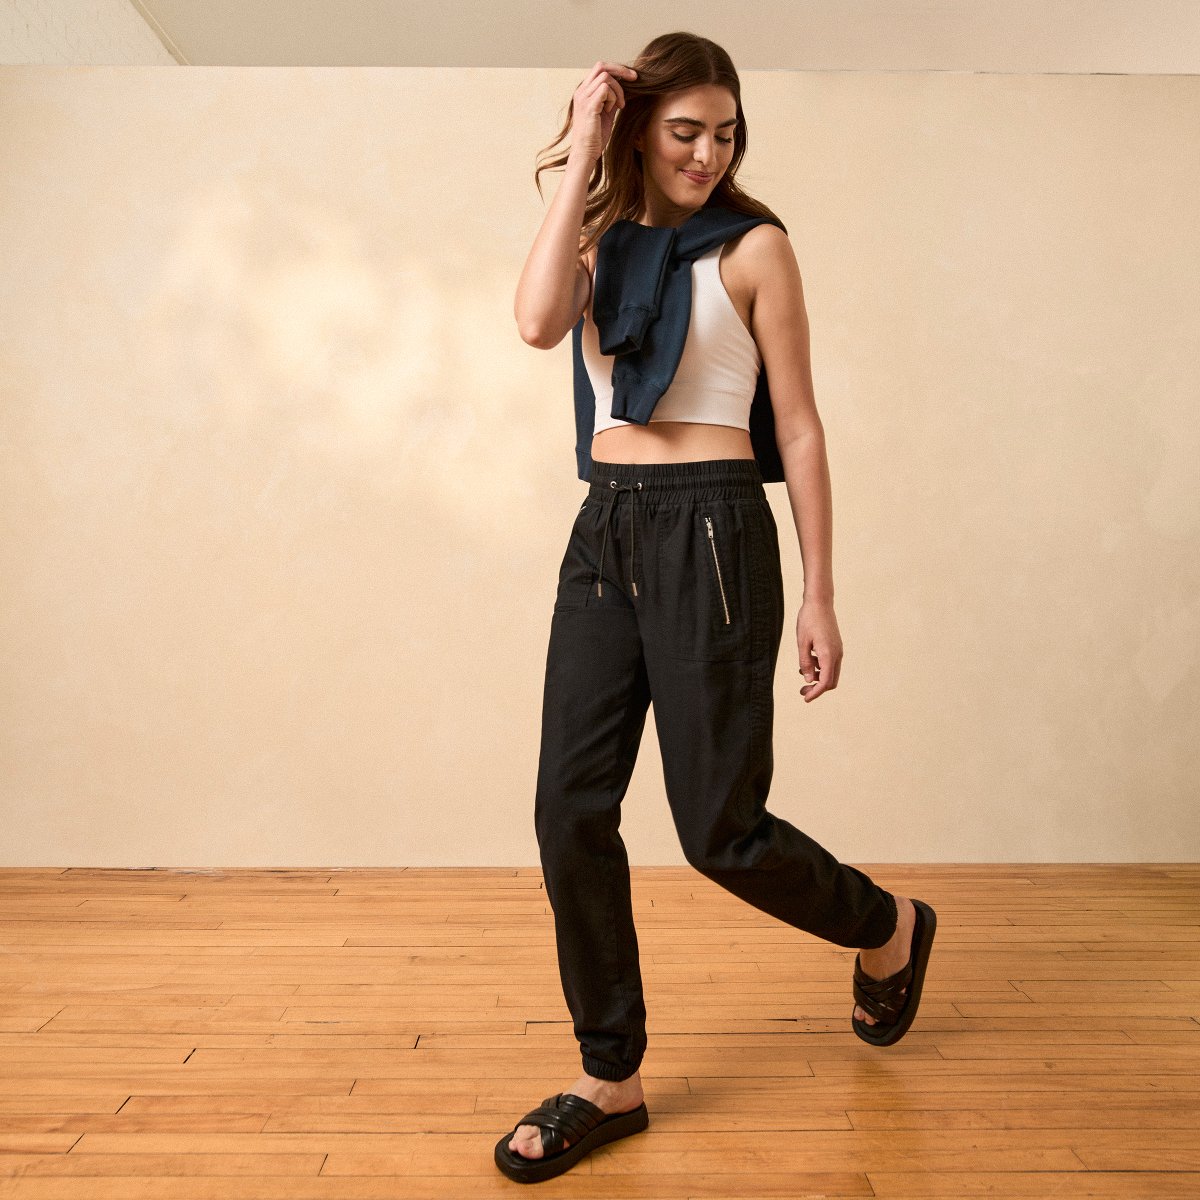 Step into the world of chic and breezy comfort with our Pull-On Linen Joggers. 

Model Height: 5'10'
Top: ST
Bottom: ST
.
.
.
#americantall #wethetall #tallwomen #tallgirl #tallpeople #tallclothing #tallstyle #womenstyle #ootd #fashion